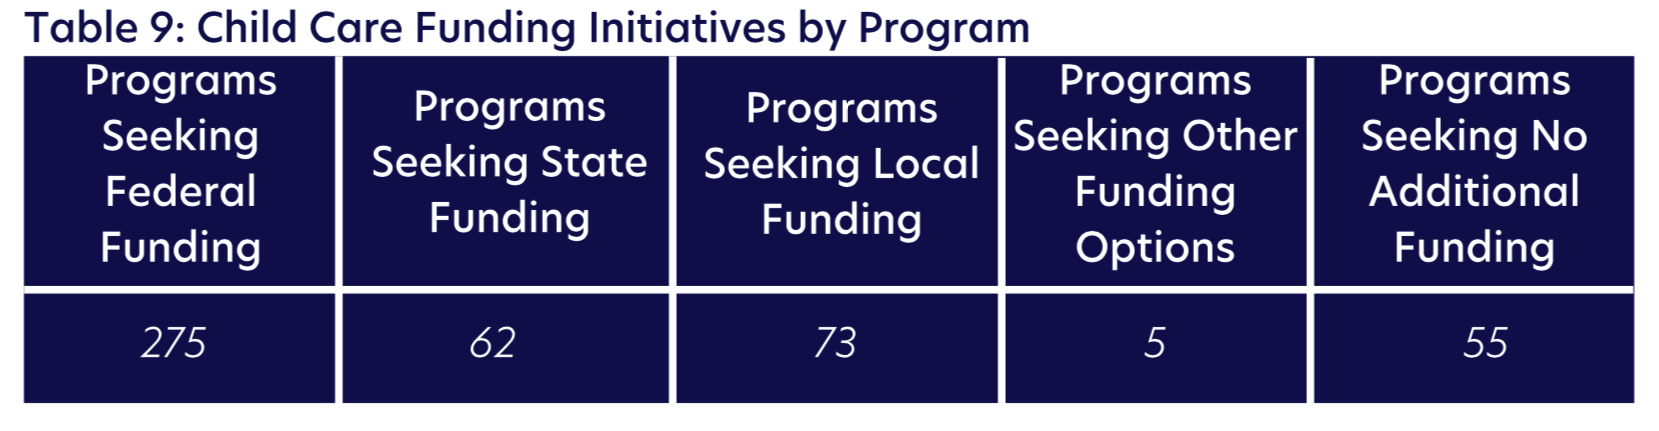 Table 9: Child Care Funding Initiatives by Program